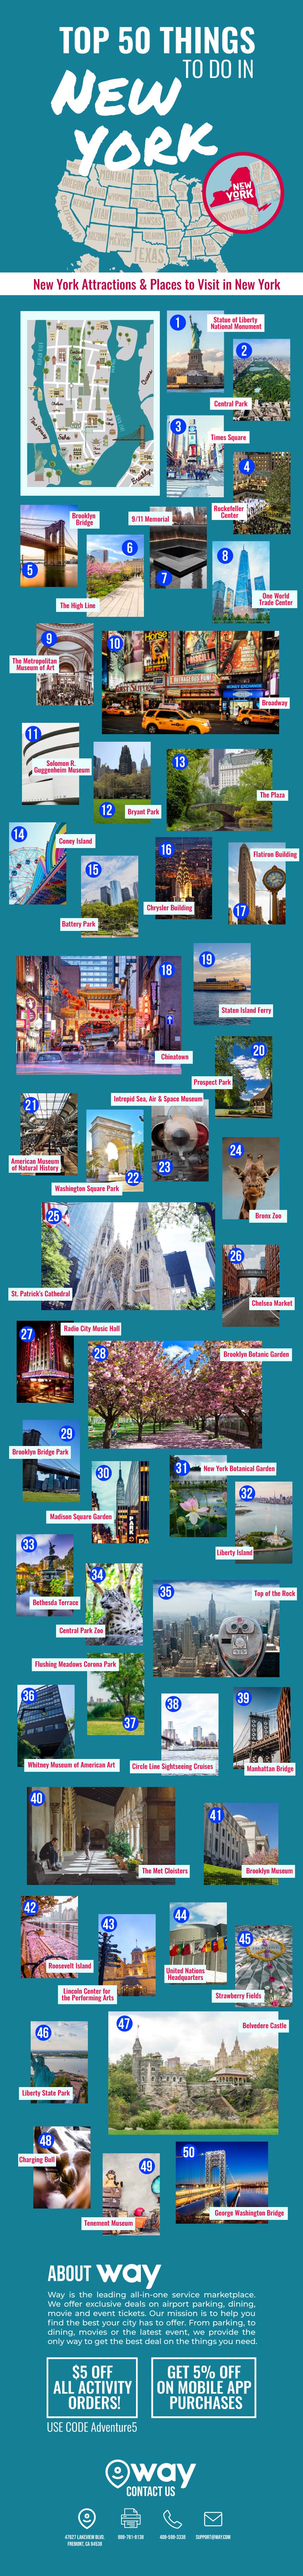 Things to Do in New York